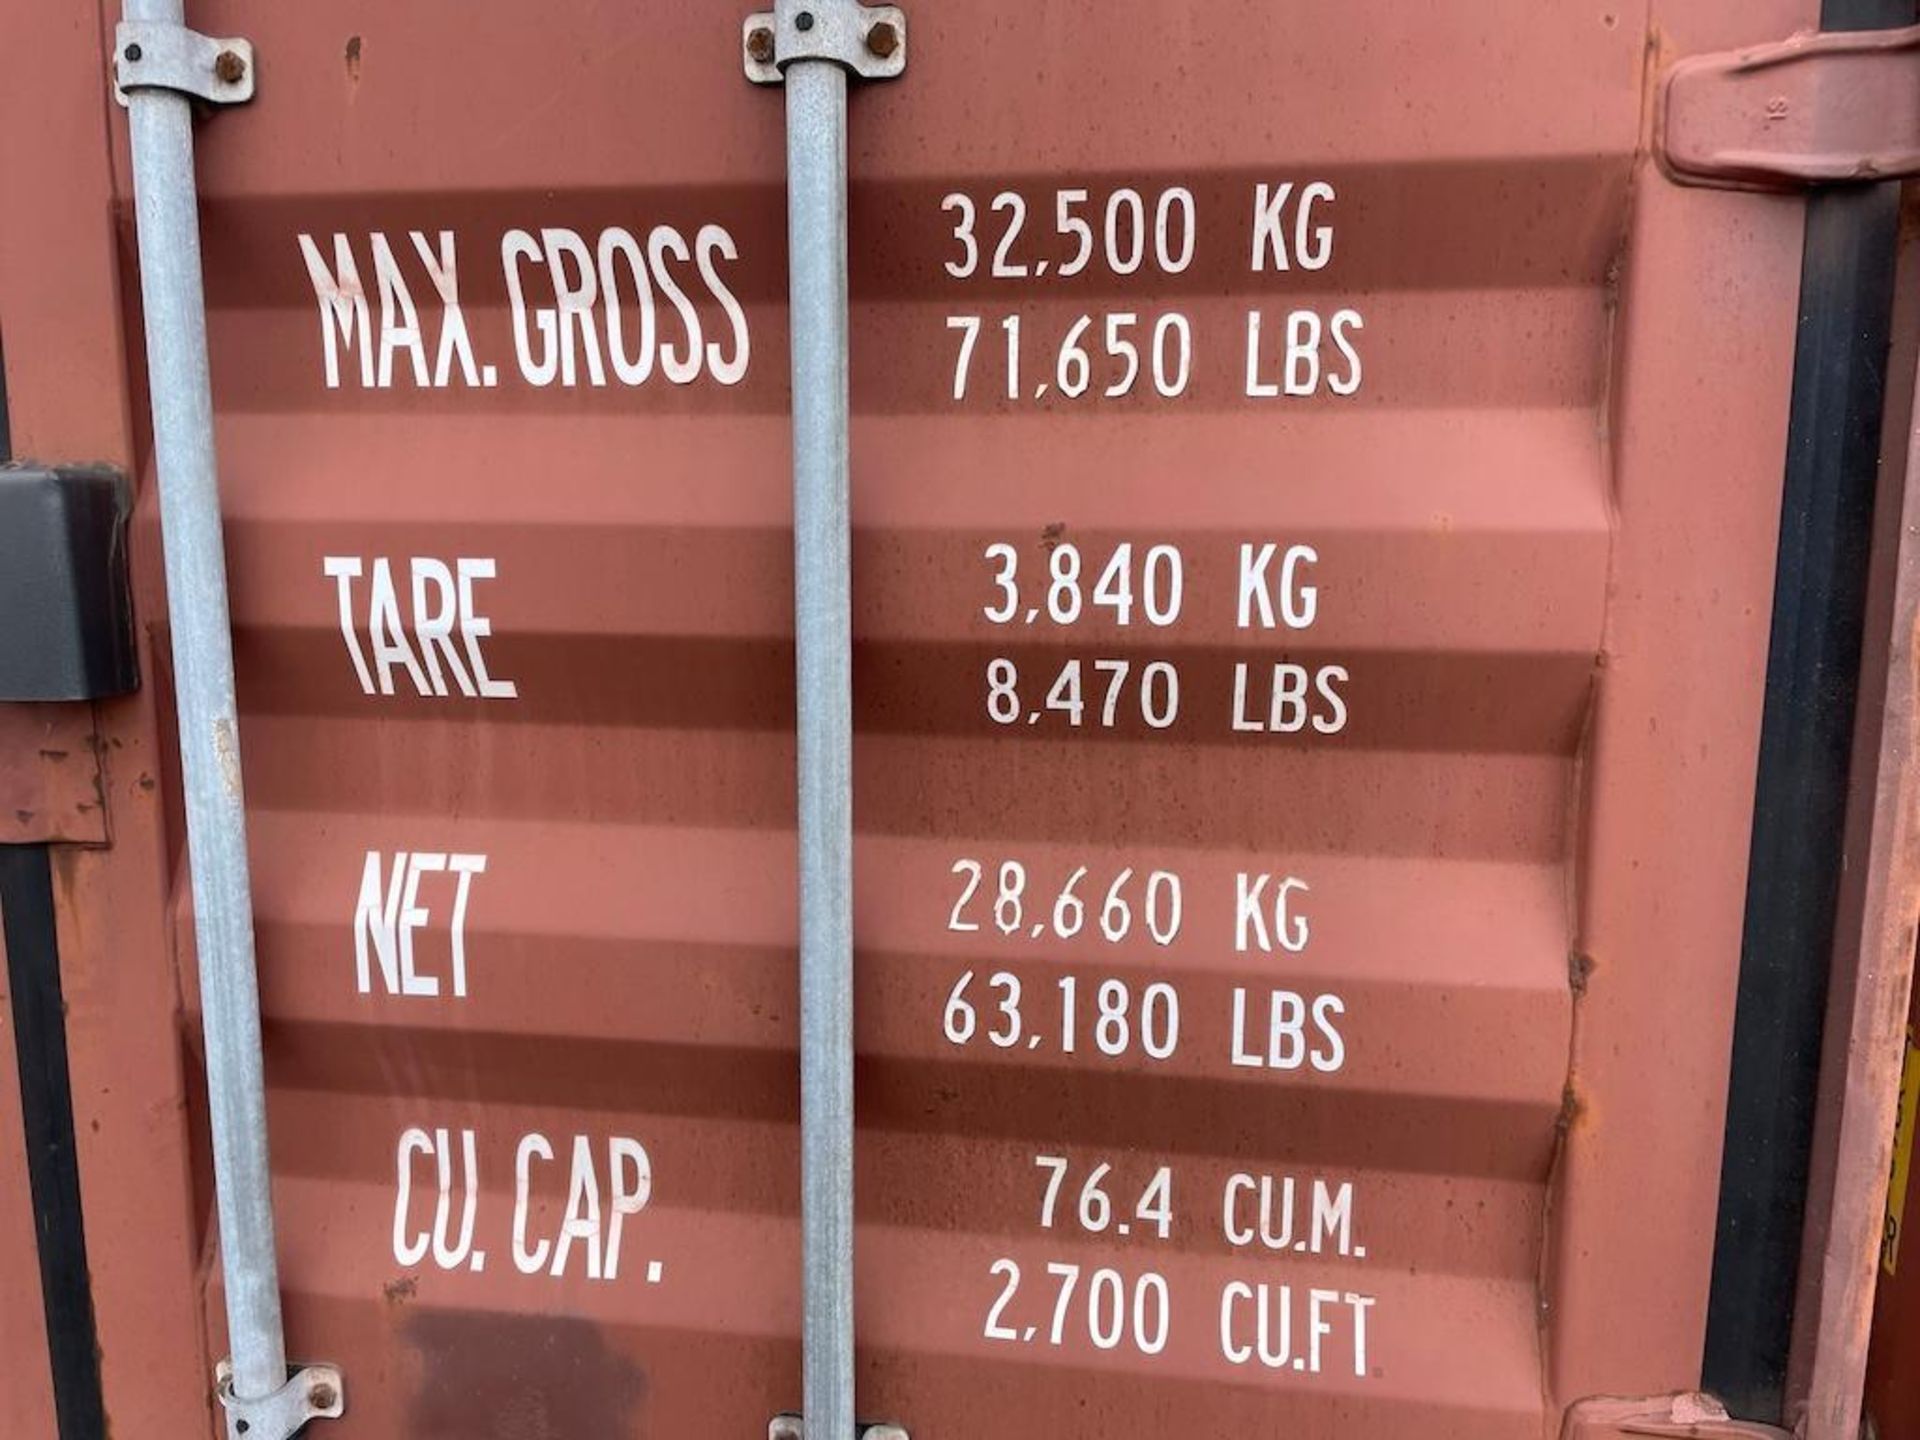 40 FT SEA CONTAINER, EXCLUDING CONTENTS, DELAYED PICK UP UNTIL MAY 13 [6] [TROIS RIVIERES] *PLEASE N - Image 3 of 4